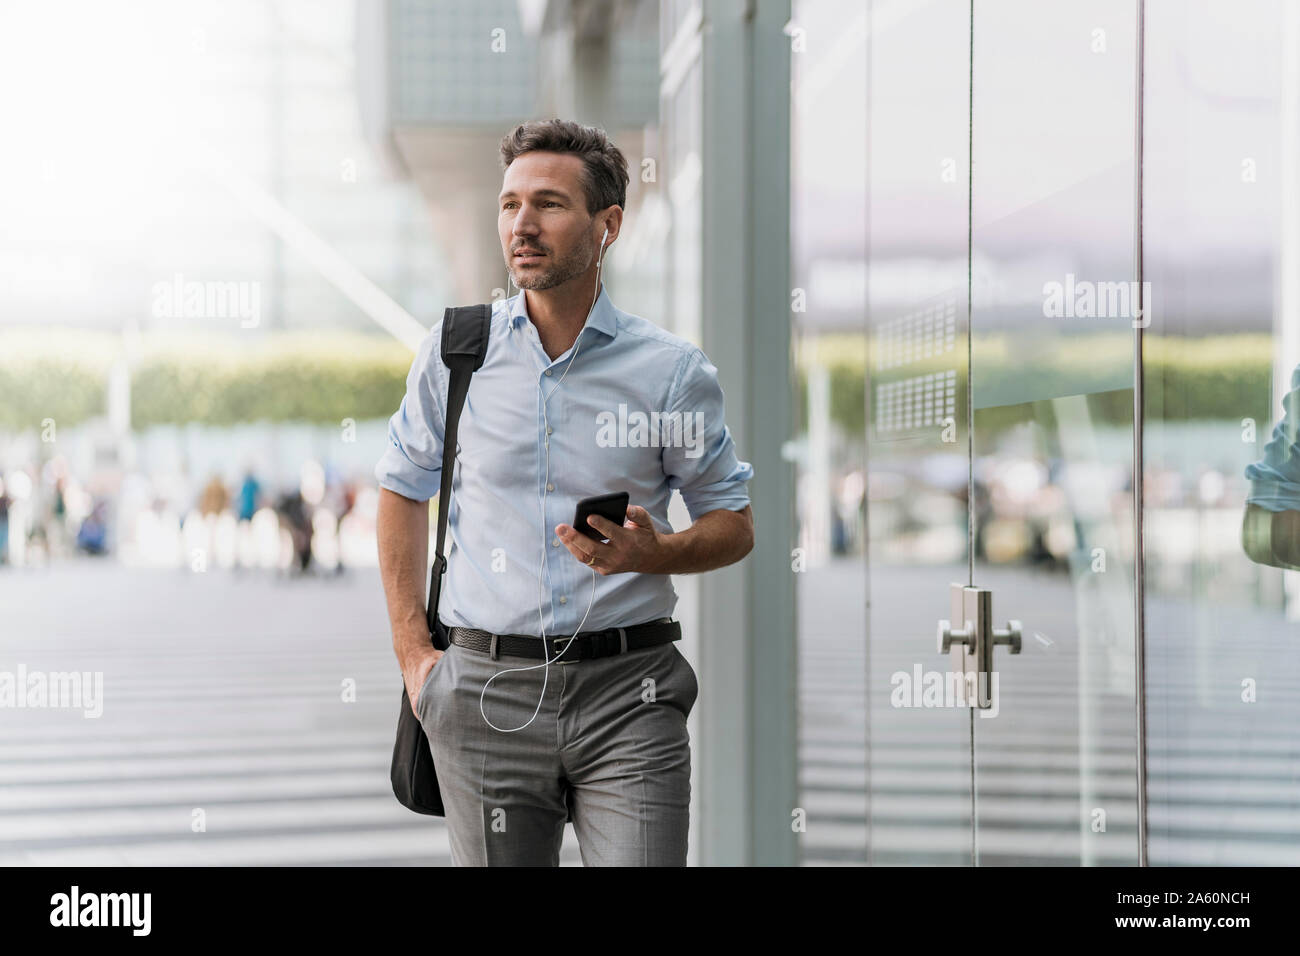 Businessman with cell phone and earphones on the go Stock Photo